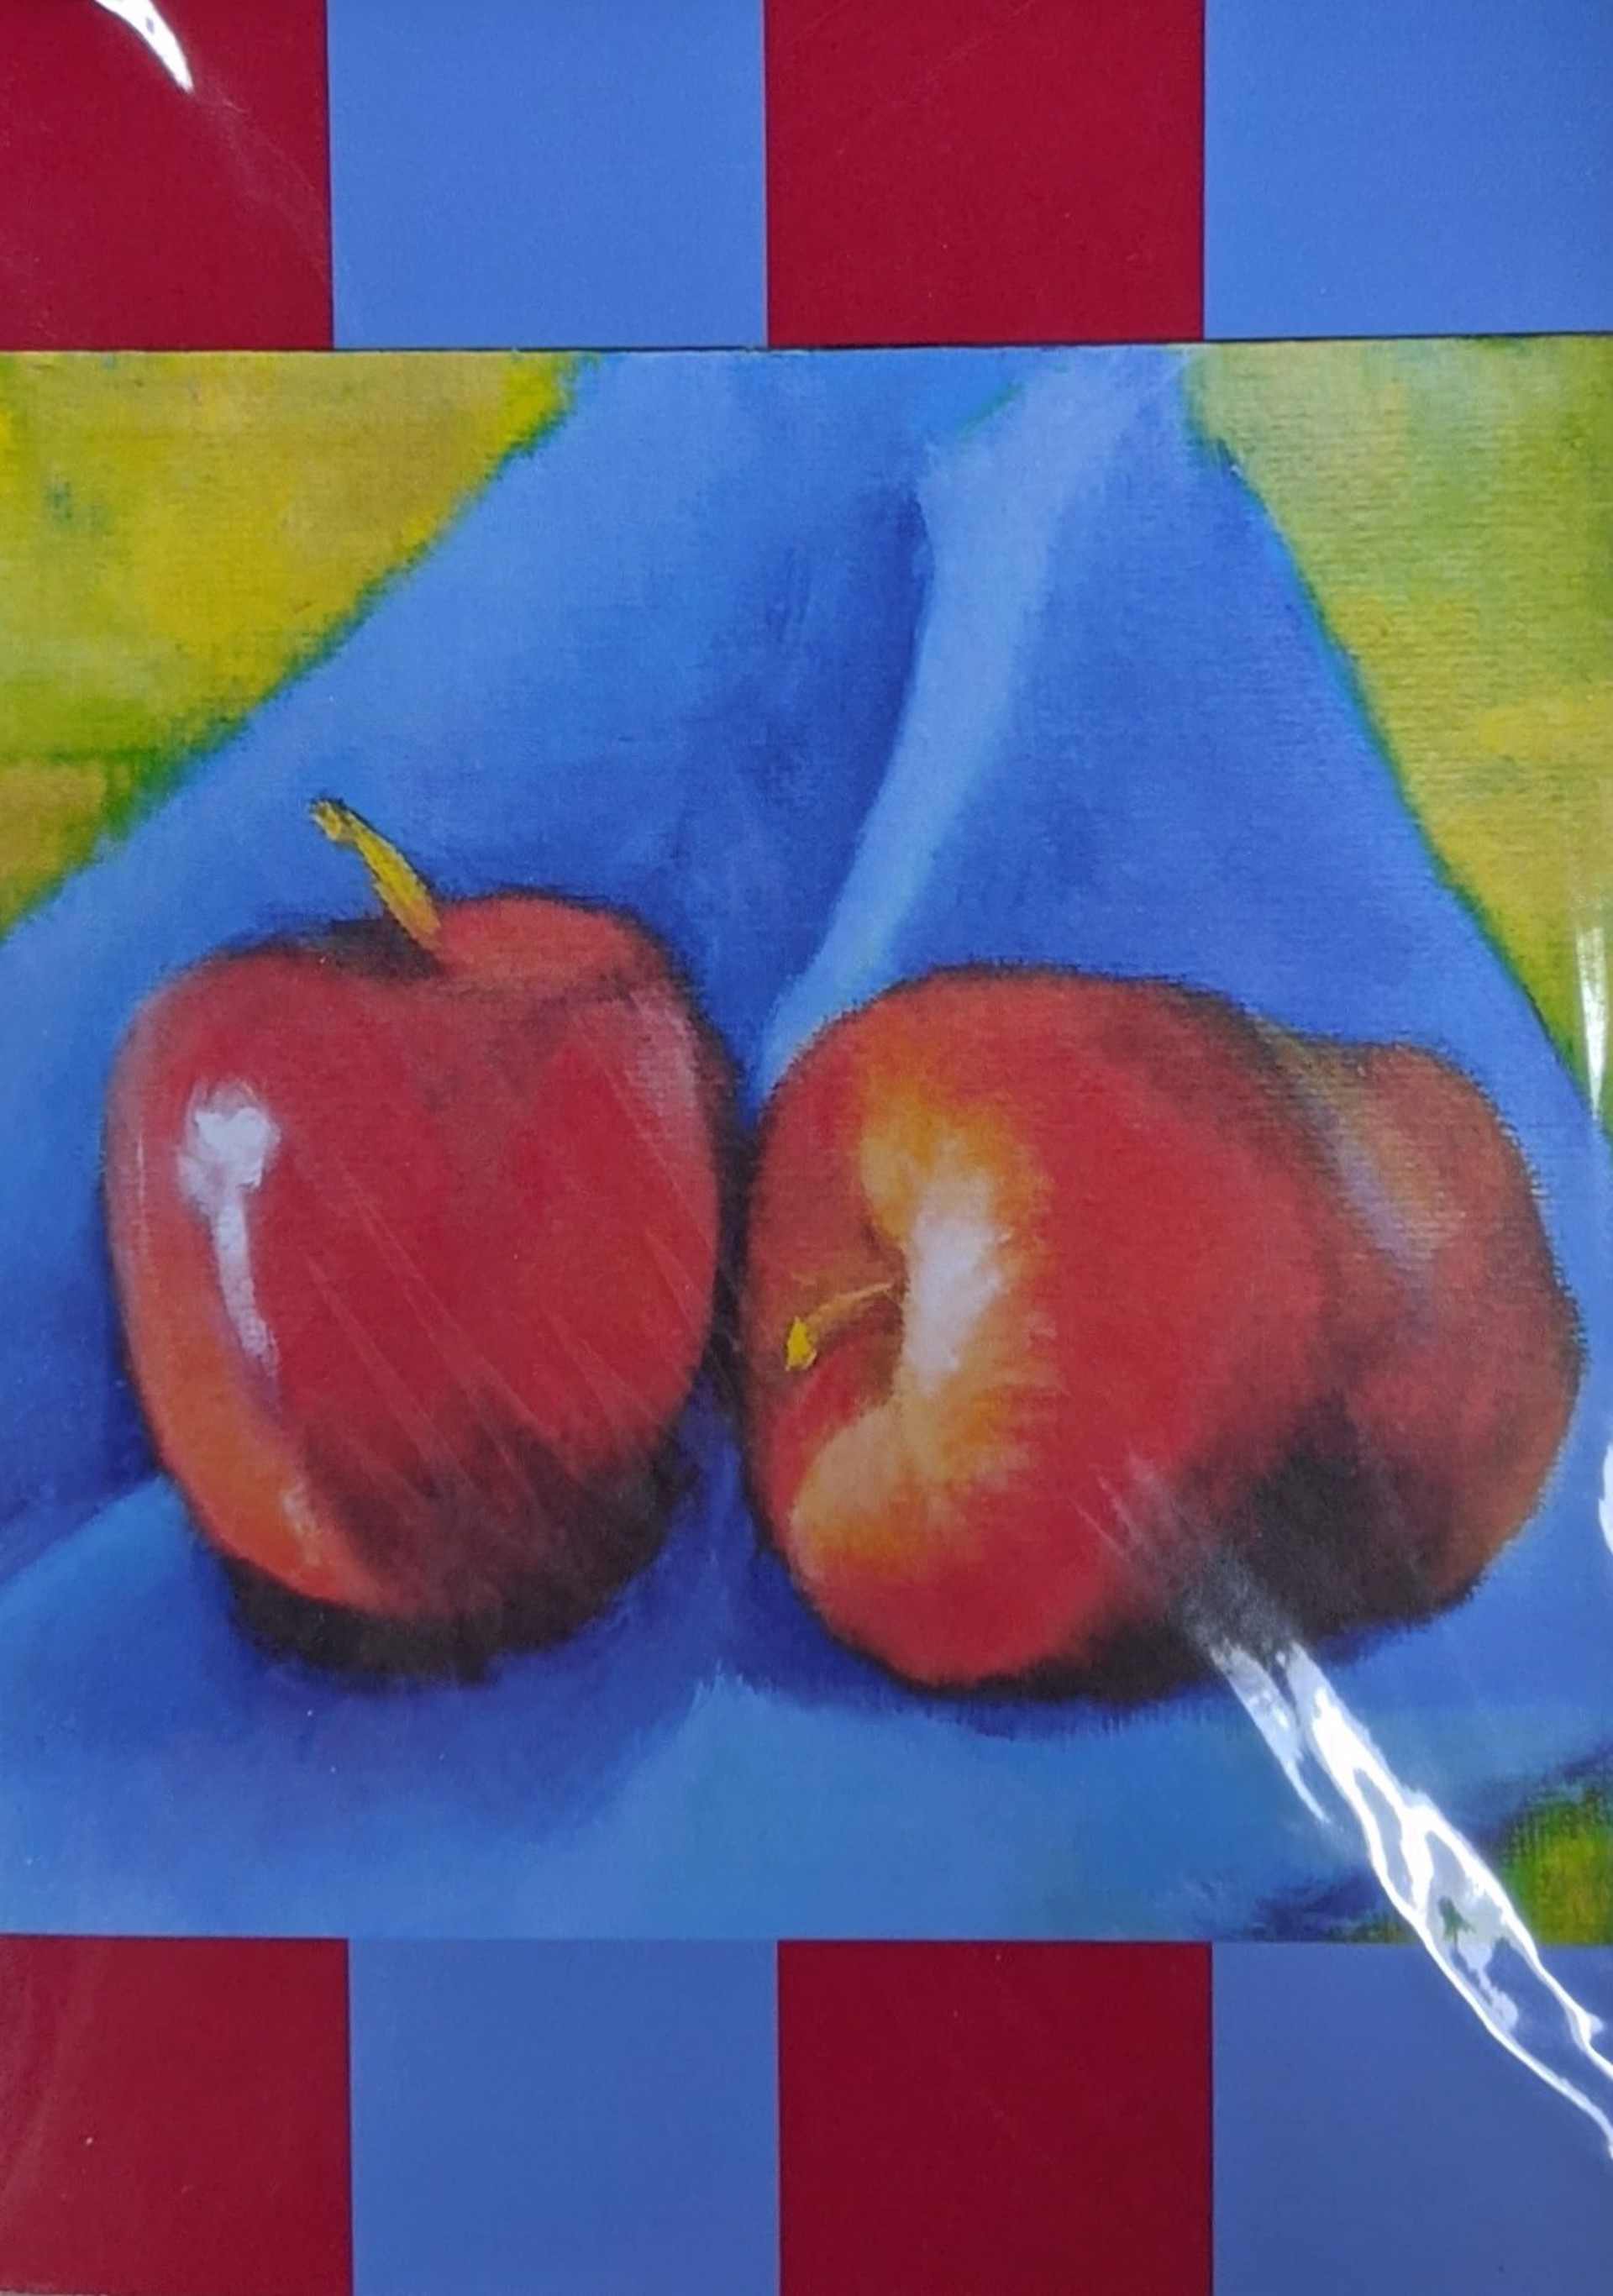 46 A Pair of Apples by Jacqueline Andes